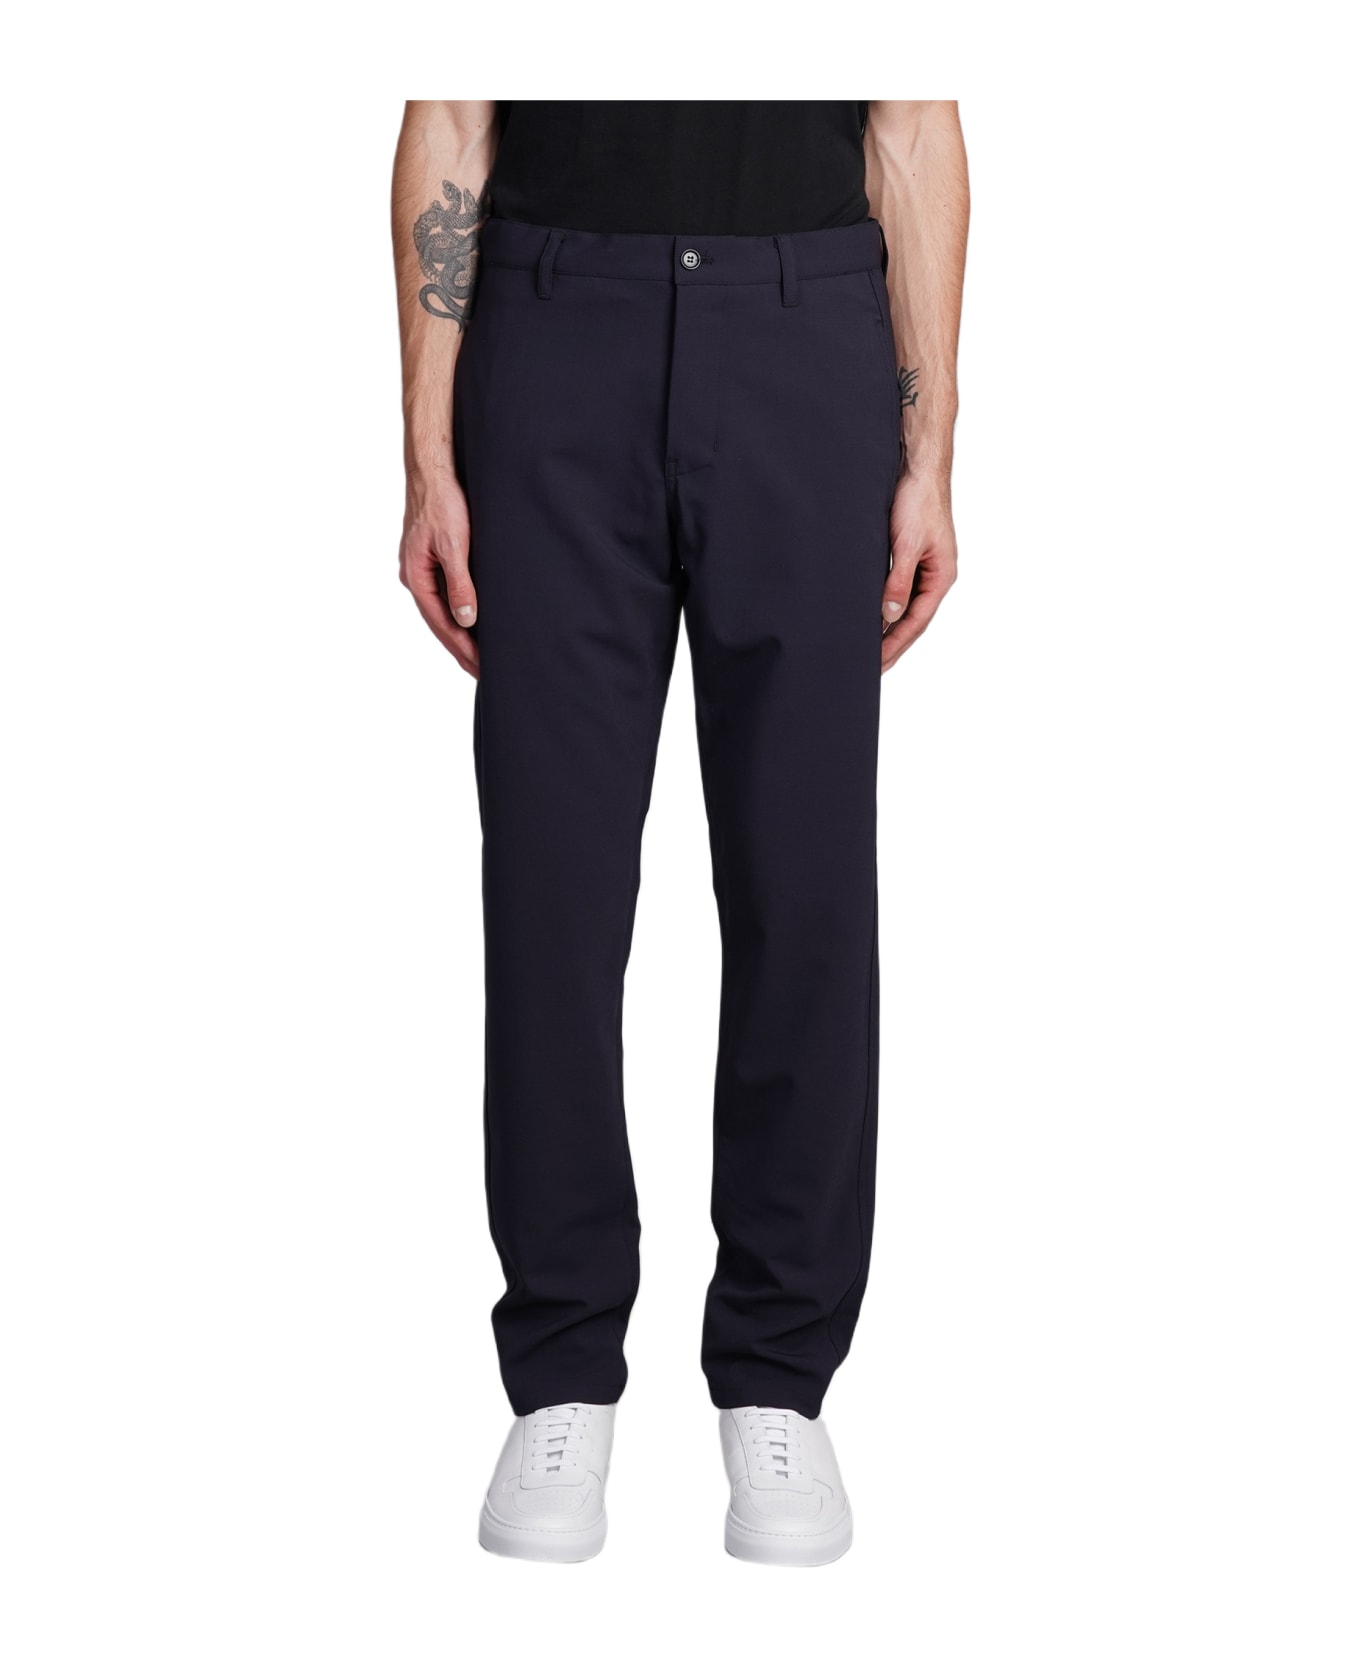 Aspesi Pants In Blue Polyester - Navy Blue ボトムス